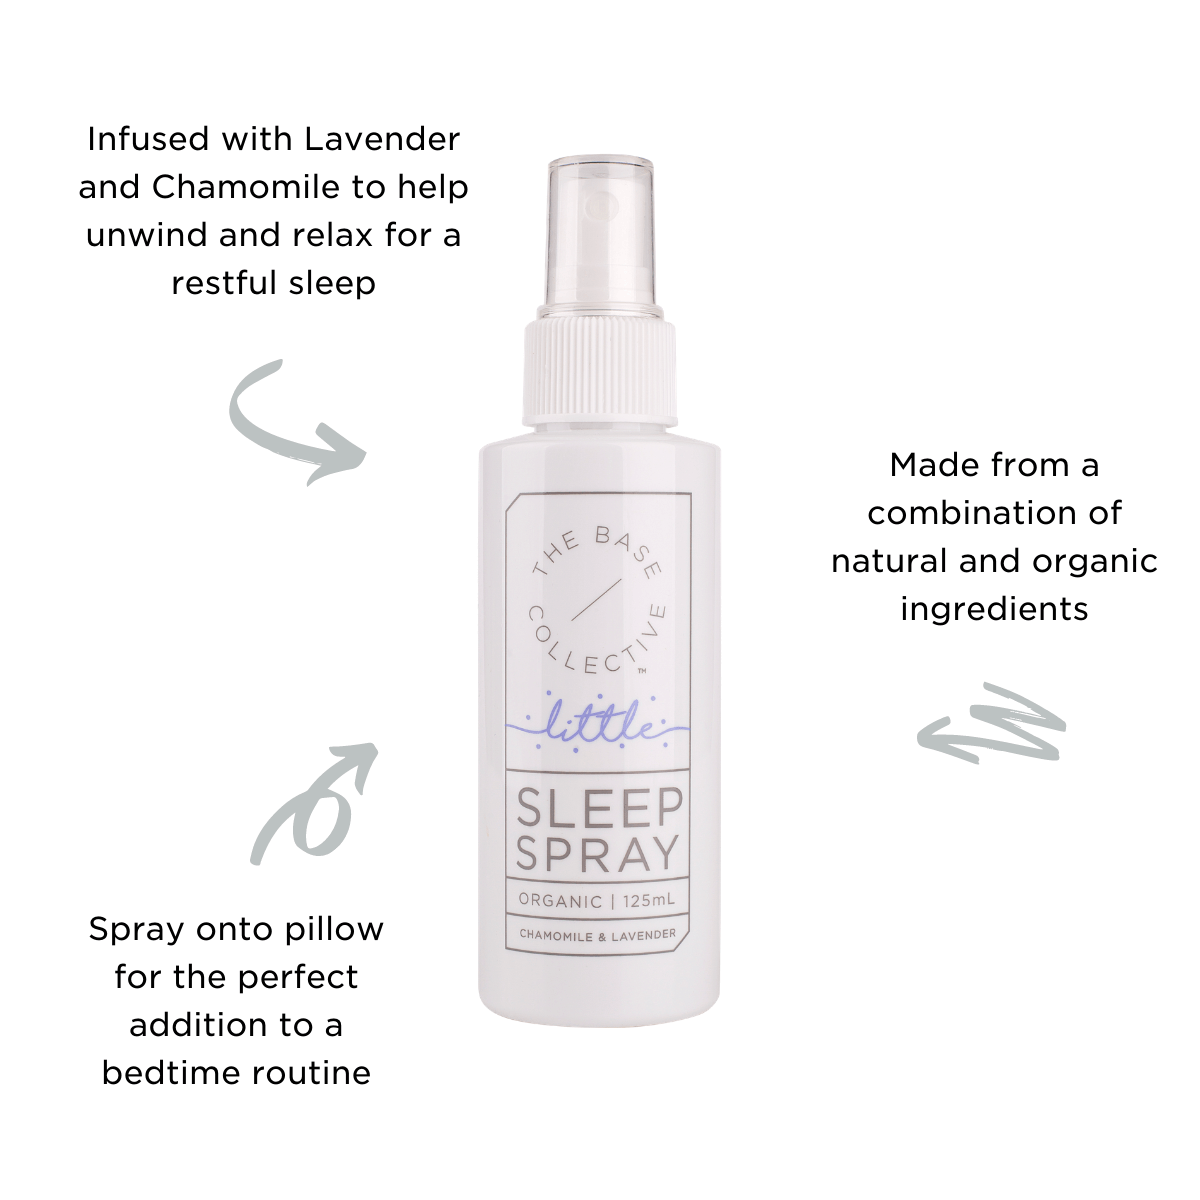 Lavender Sleep Spray, Little by The Base Collective on white background with arrows pointing to product with text describing benefits.